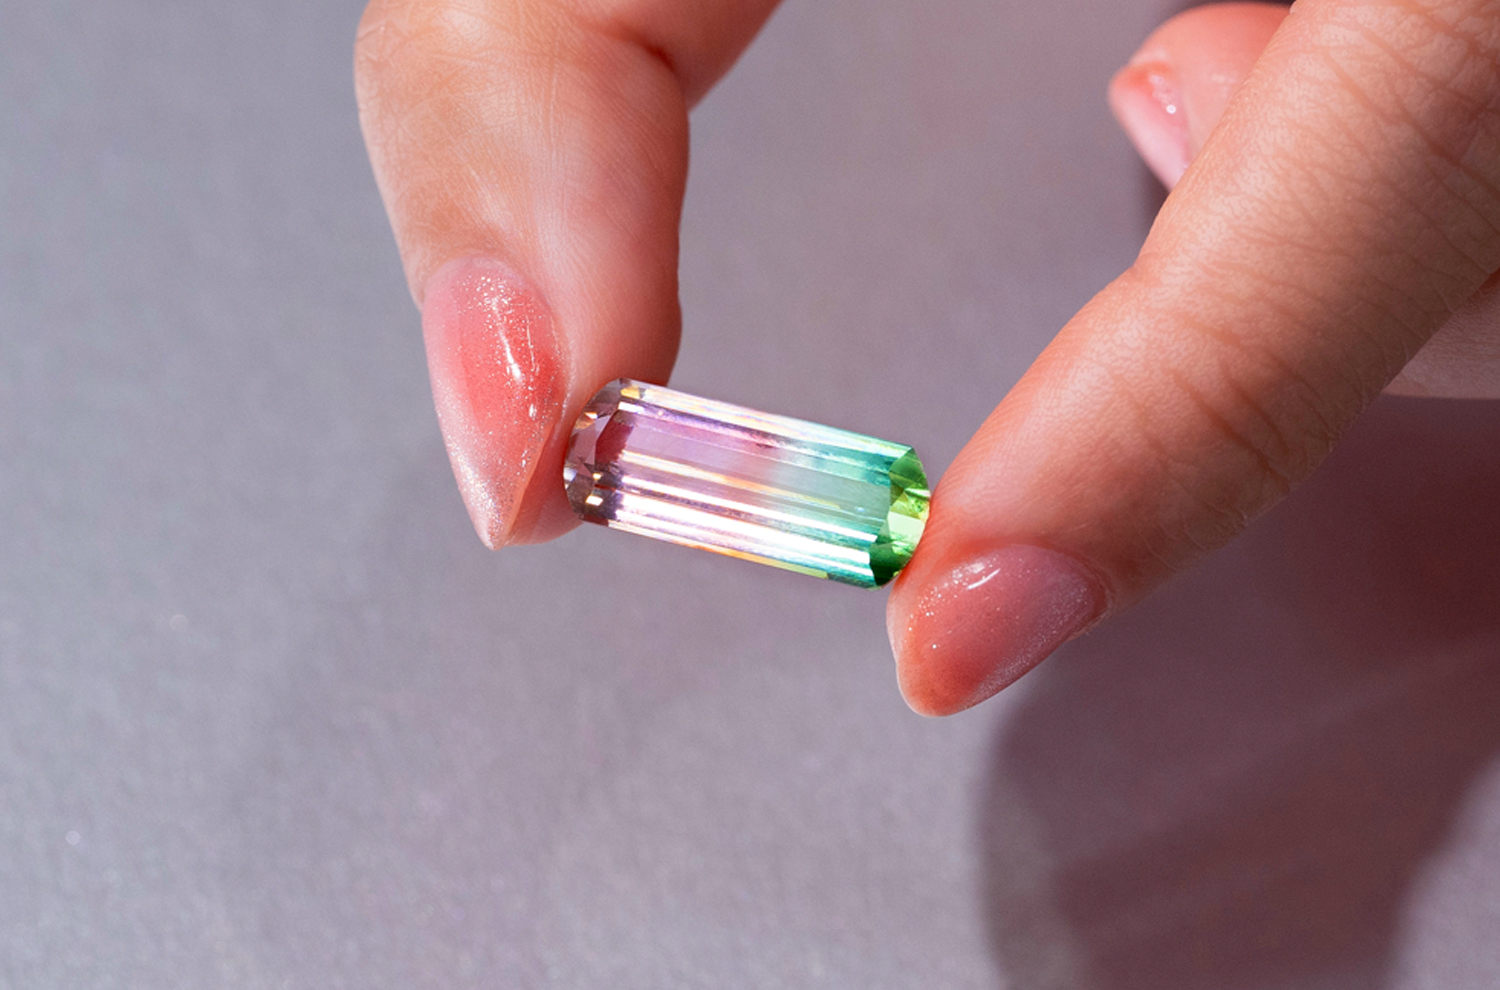 A 7.5 carat Watermelon Tourmaline shows a unique gradient of colours from pink to white to green and was specially cut to bring out these hues.